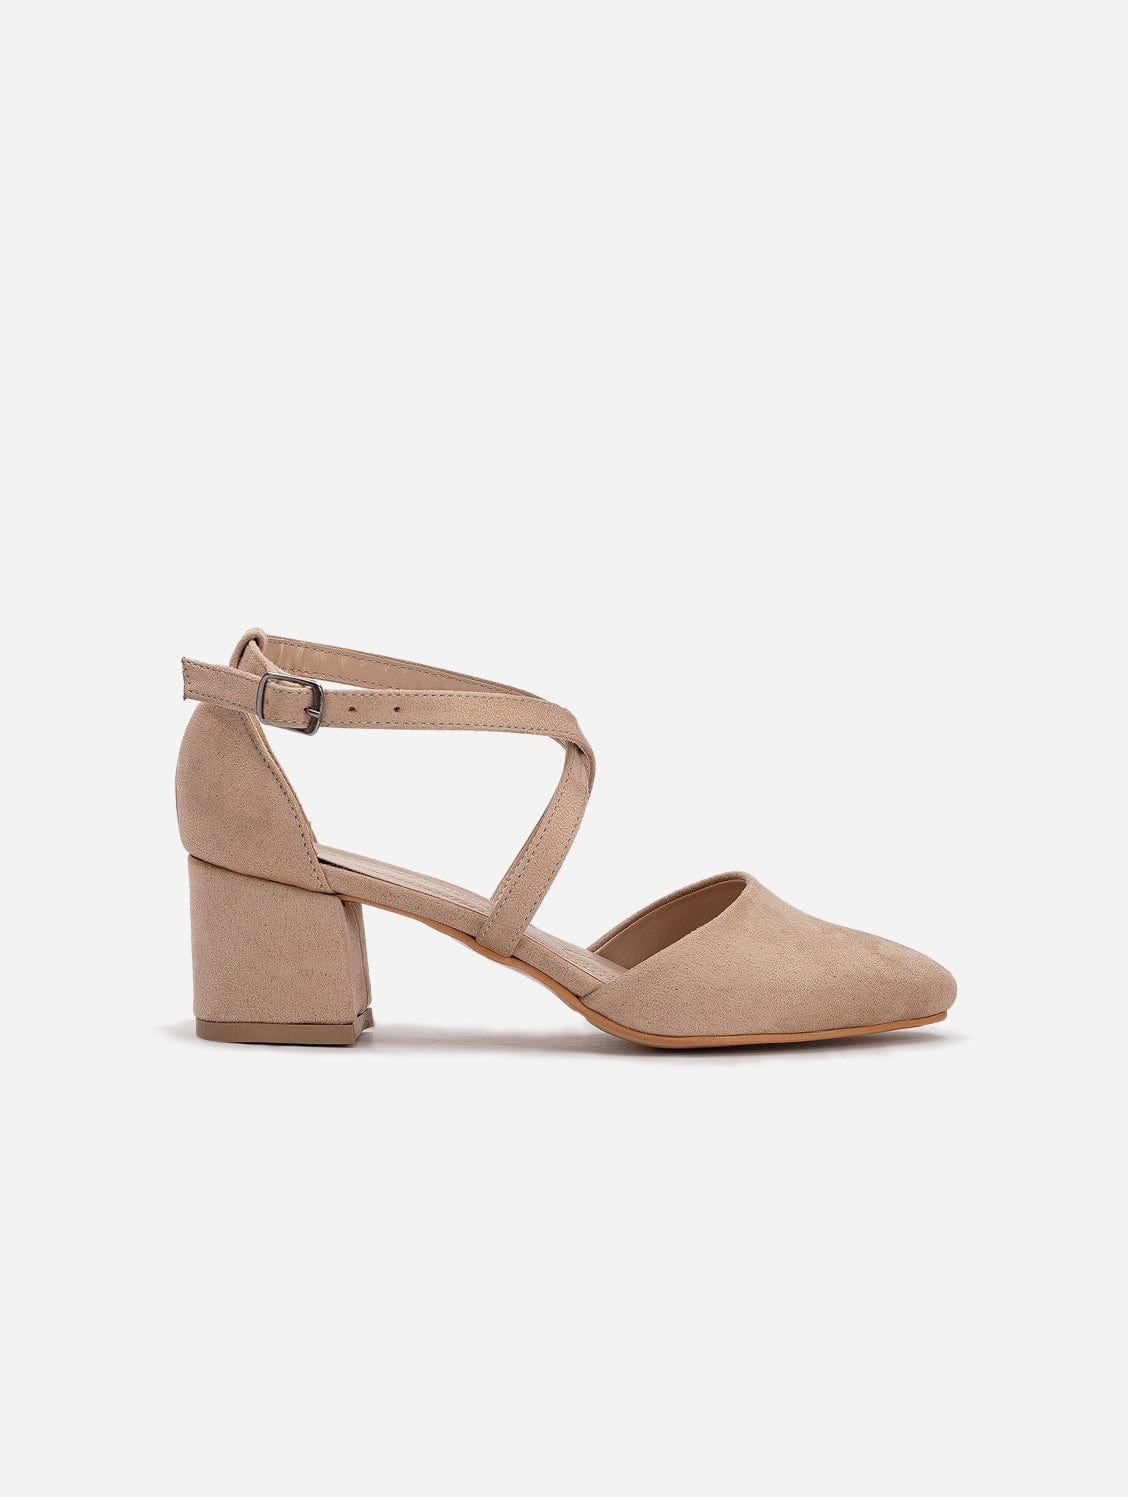 Prologue Shoes Dolly - Beige Suede Heels